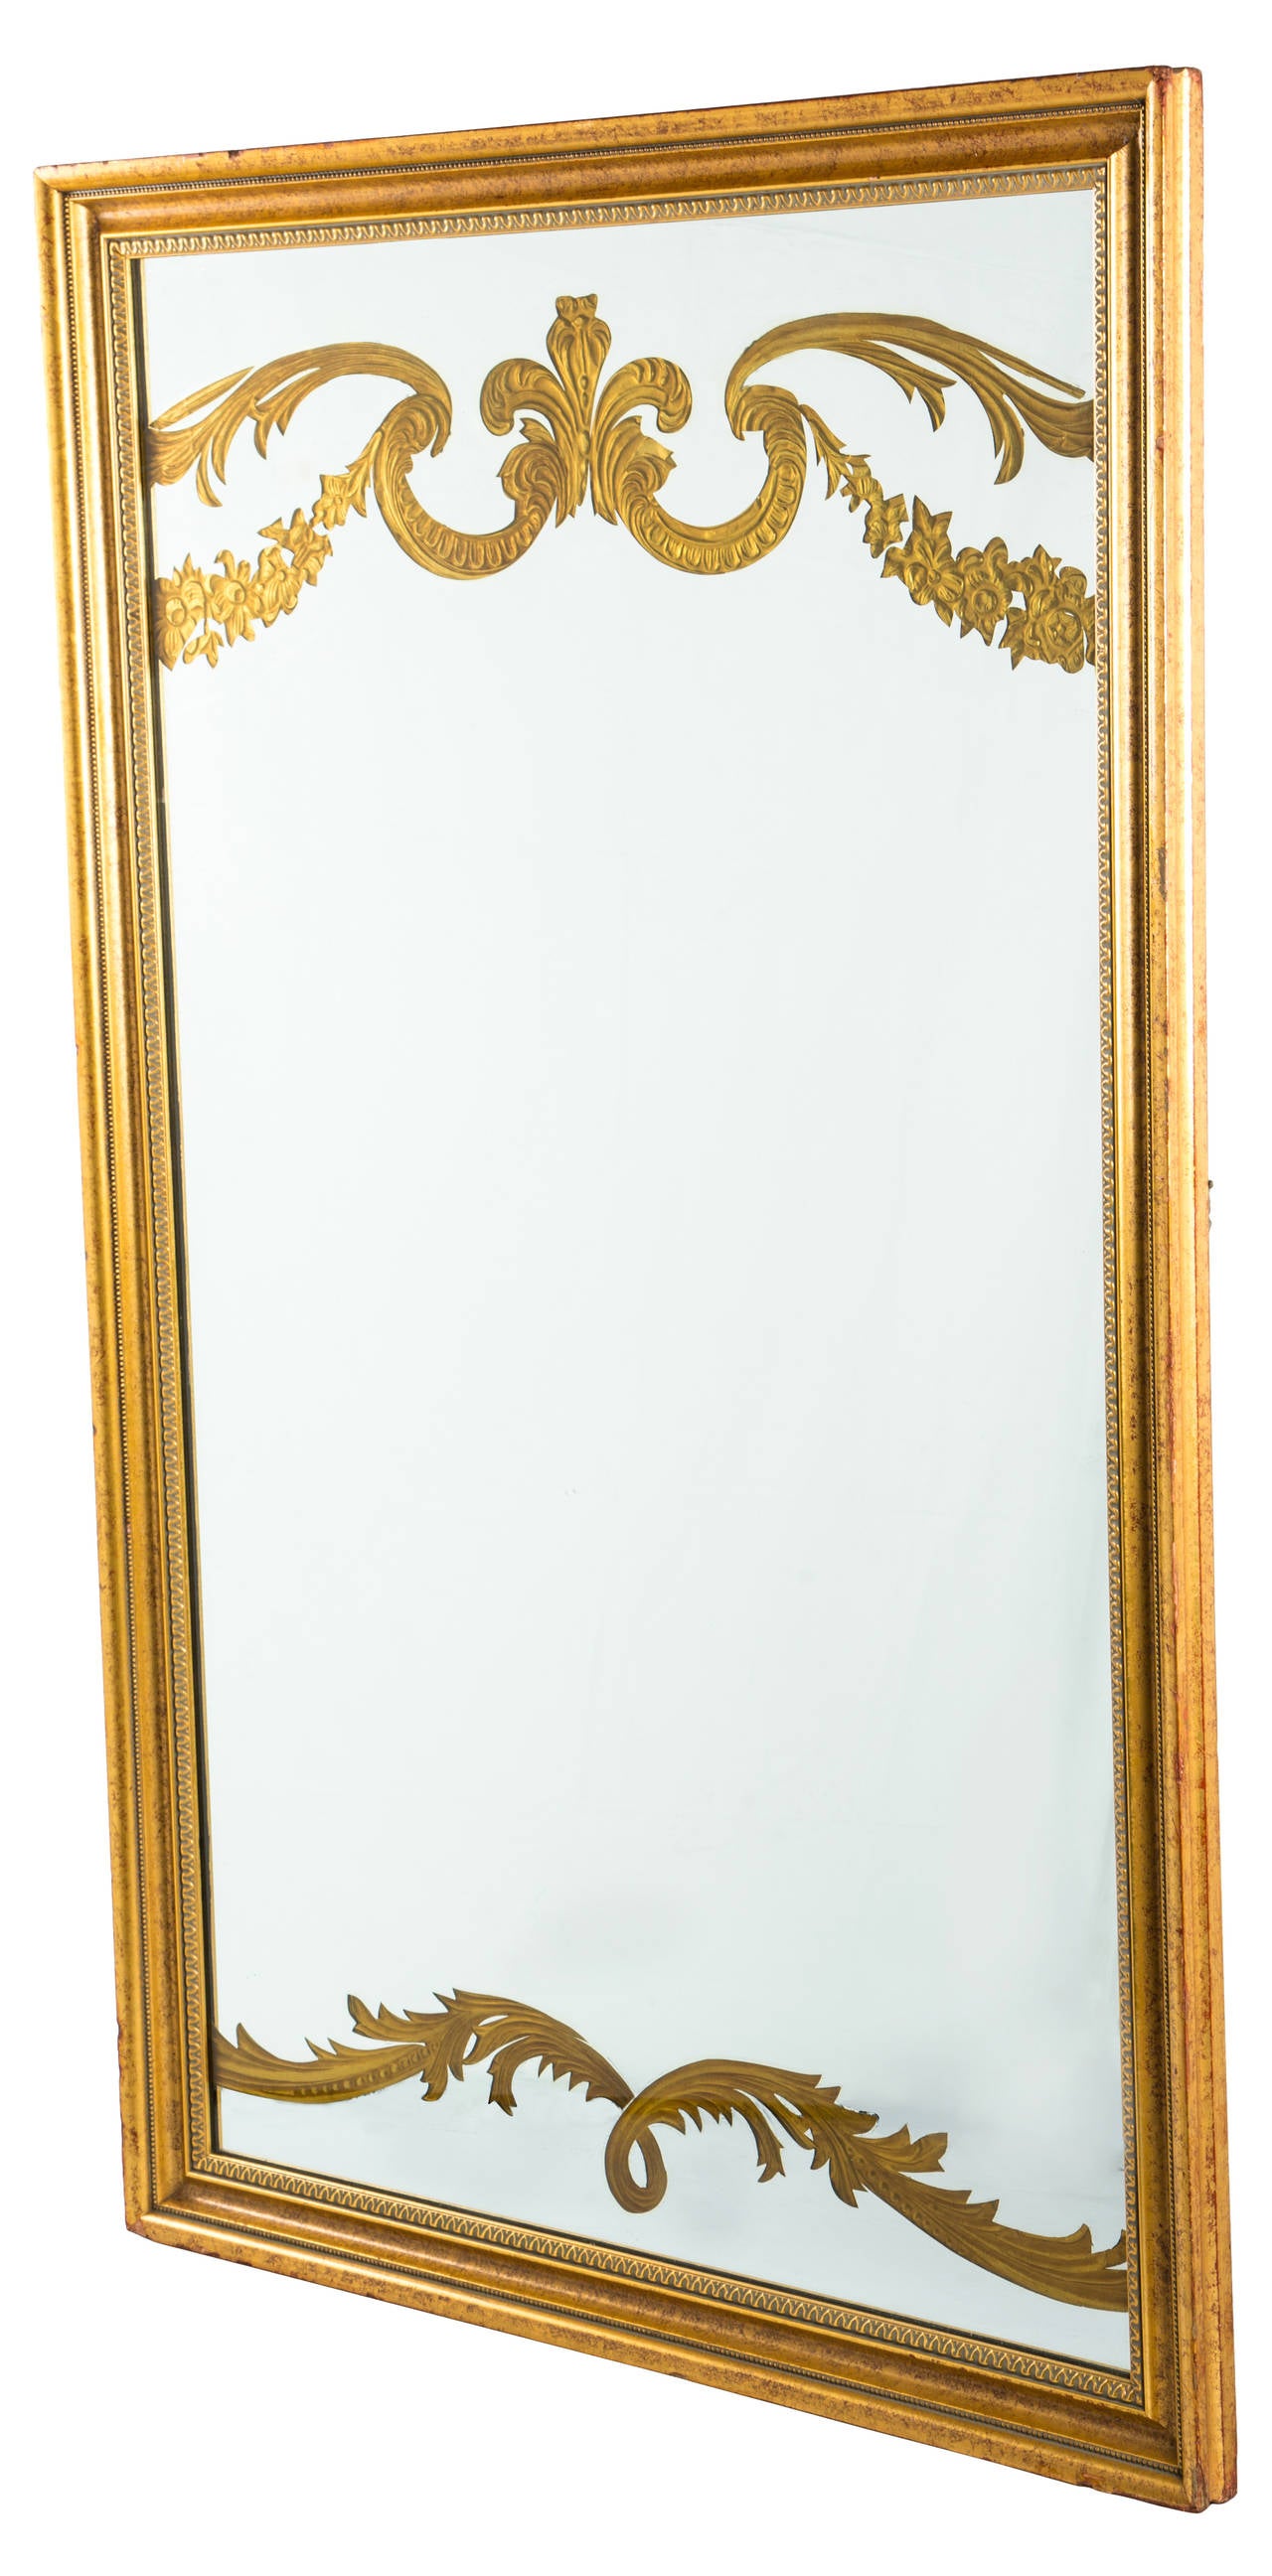 Large Midcentury Modern Hollywood Regency reverse painted gilt mirror featuring decorative Neoclassical French style motif with detailed gold painted wood frame.  In the style of Dorothy Draper.